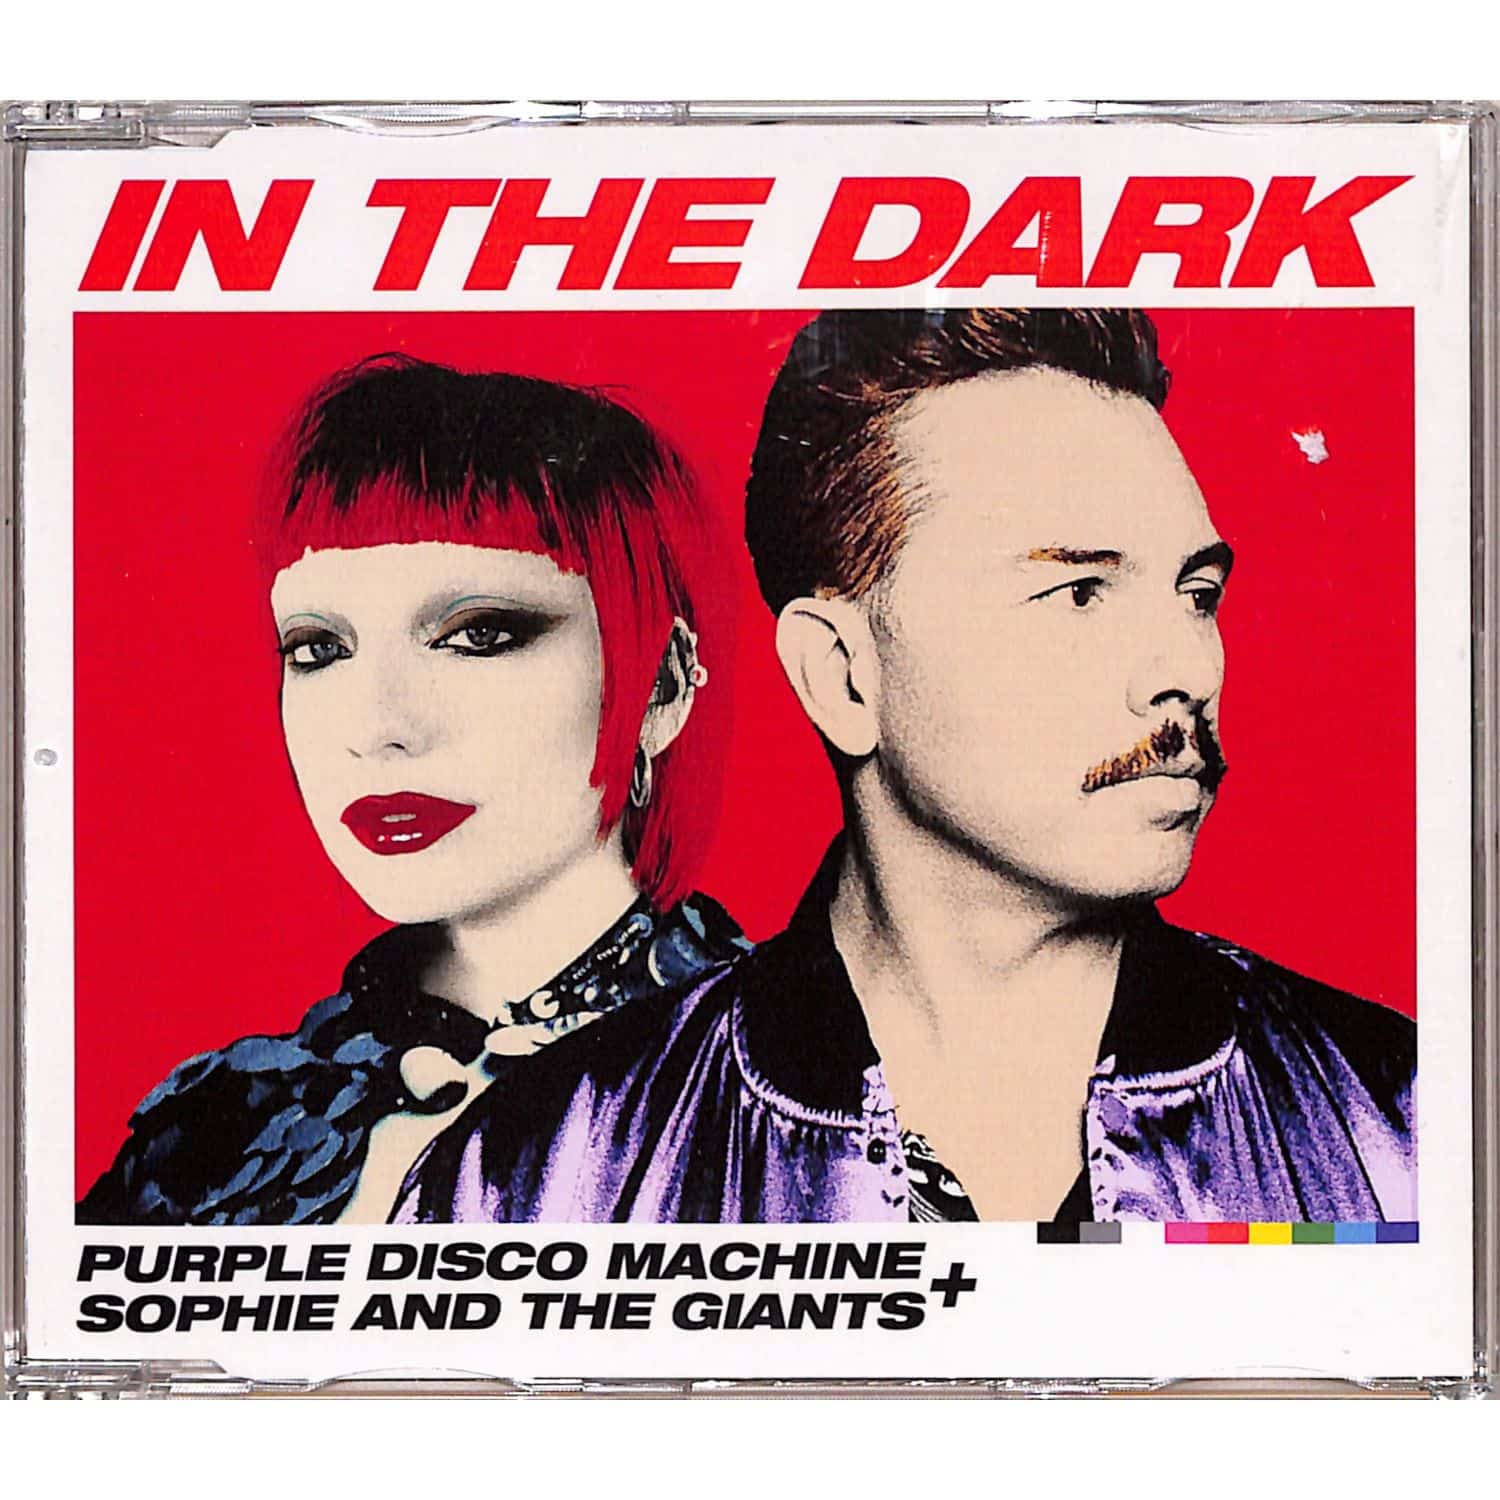 Purple Disco Machine + Sophie and the Giants - IN THE DARK 